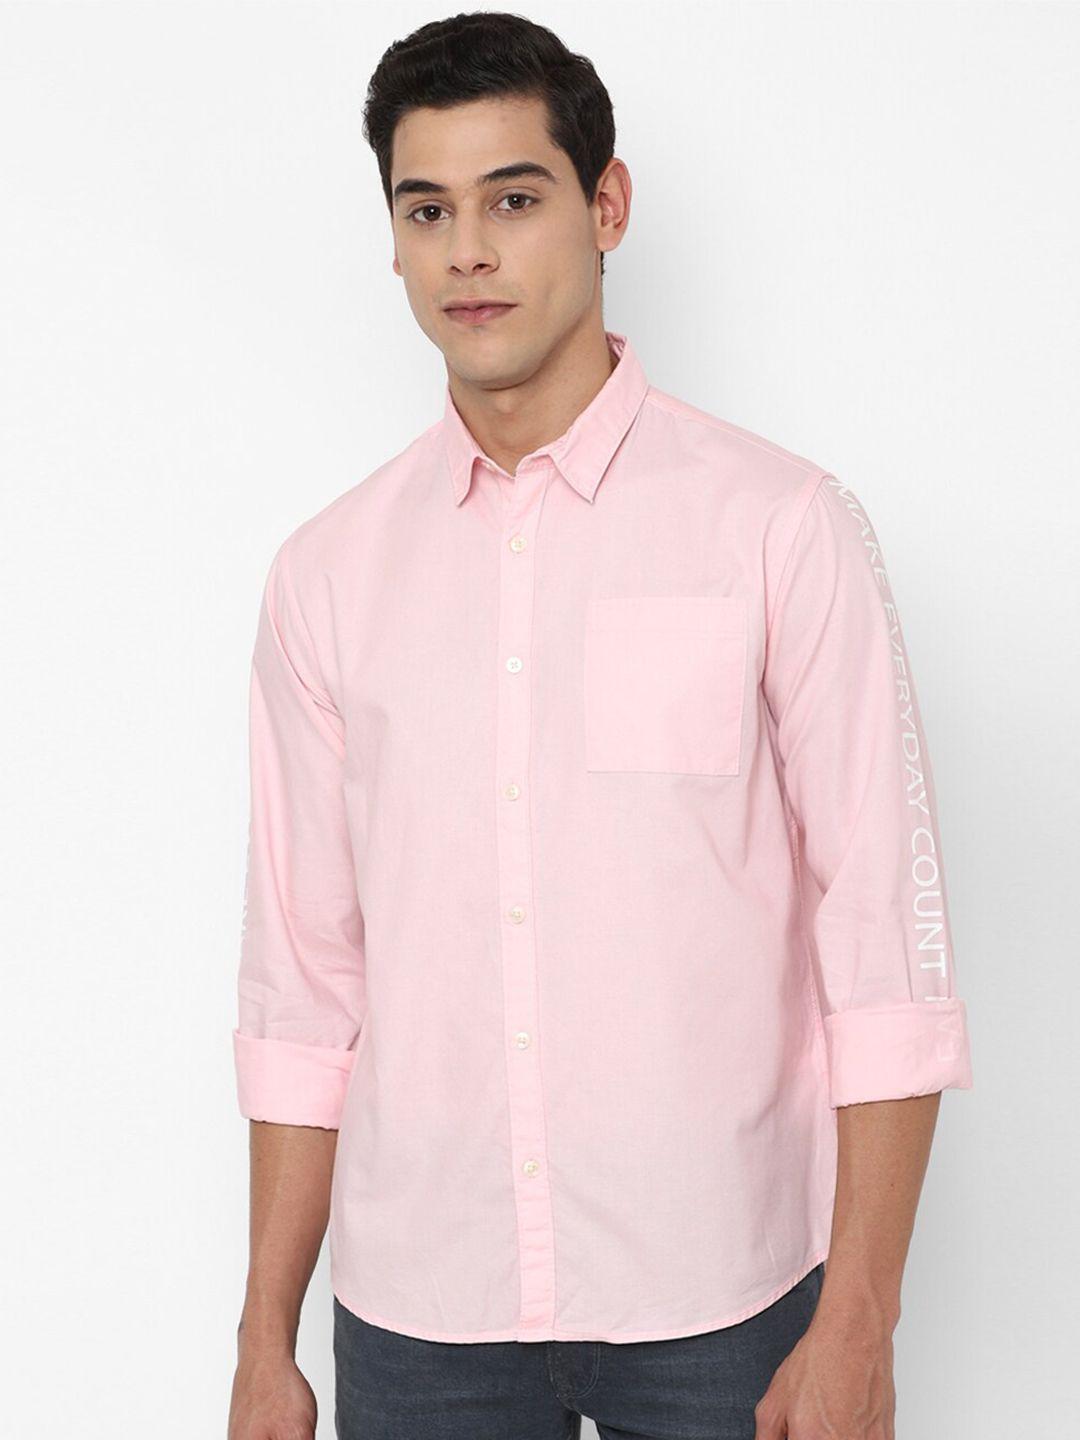 forever-21-men-pink-typography-printed--pure-cotton-casual-shirt